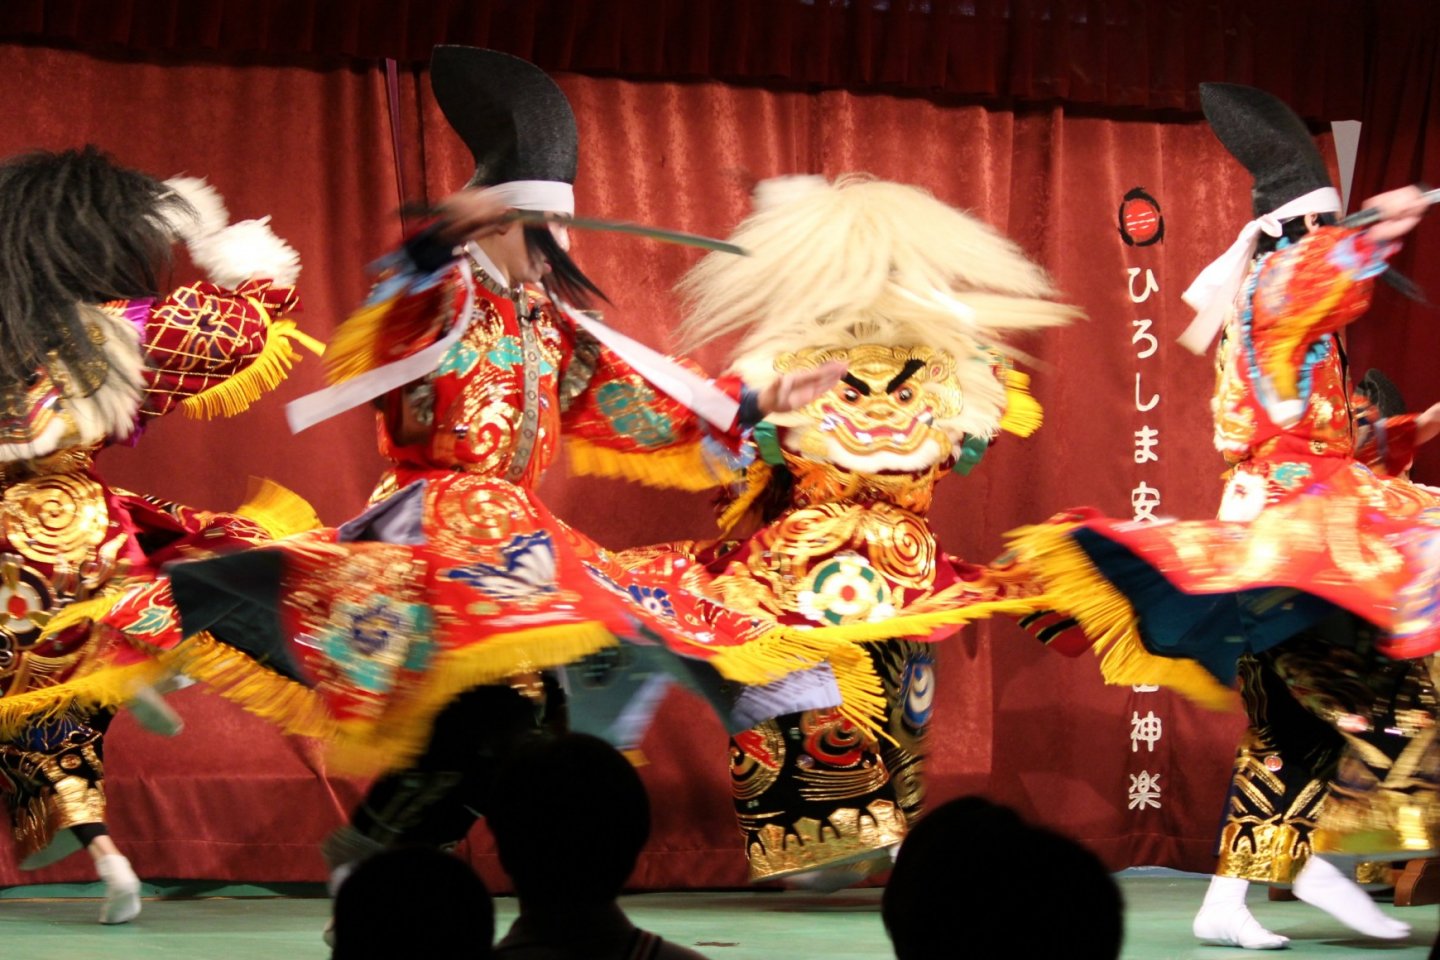 Spinning quickly in unison with costumes flaring, one of the famous trademarks of Kagura